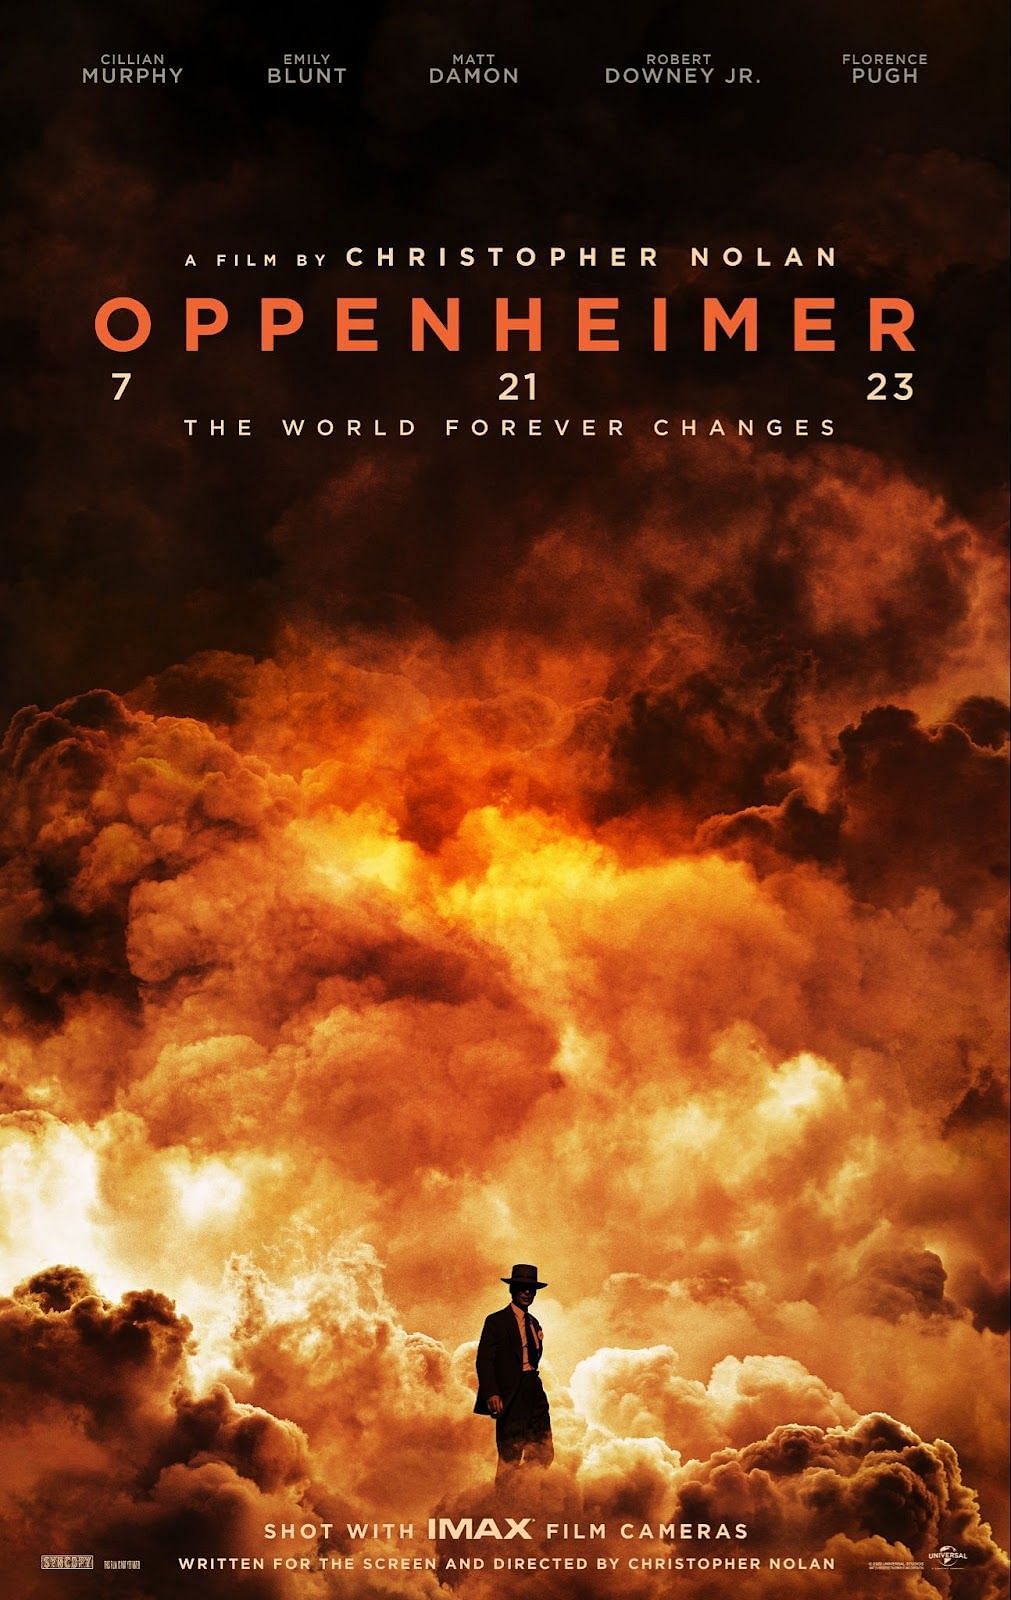 What is Oppenheimer about?